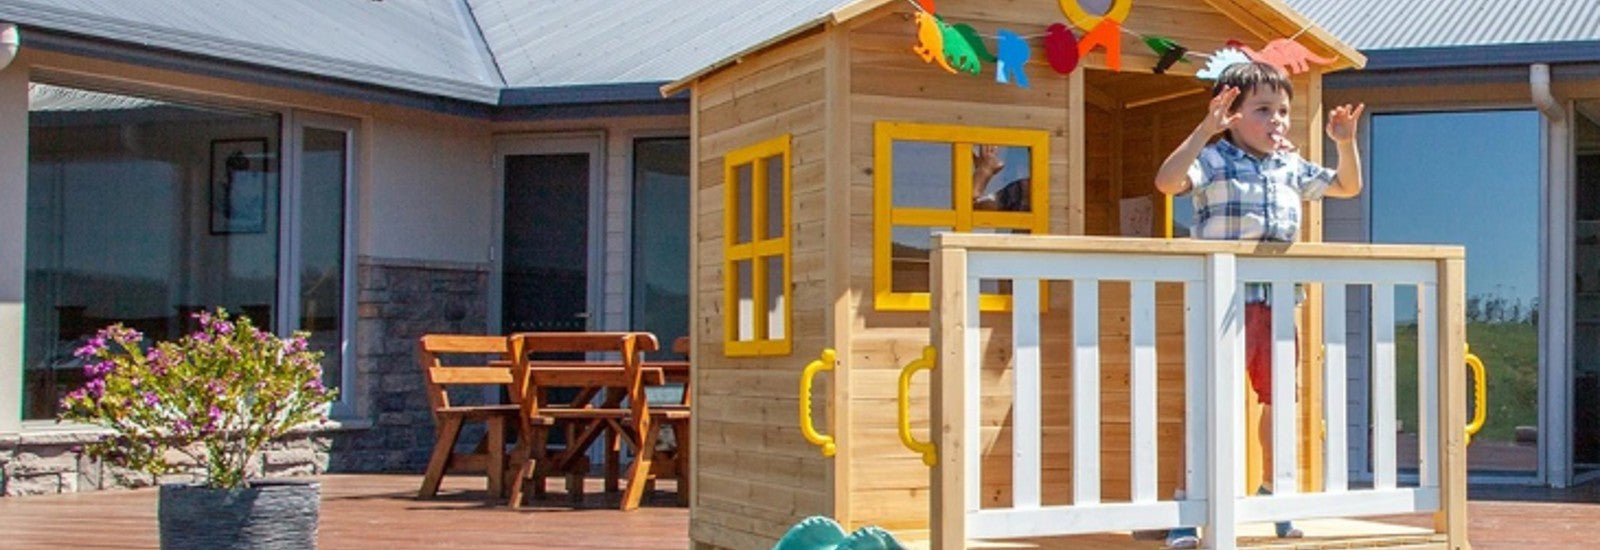 Building A Cubby House: 10 Steps To Follow